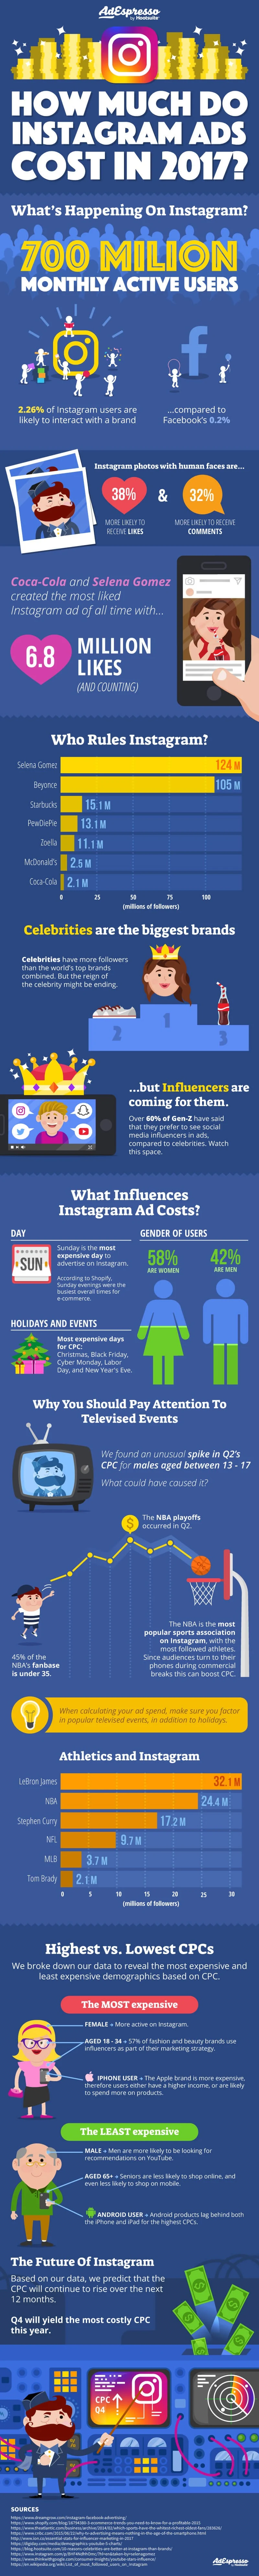 How Much Do #Instagram Ads Cost? - #infographic